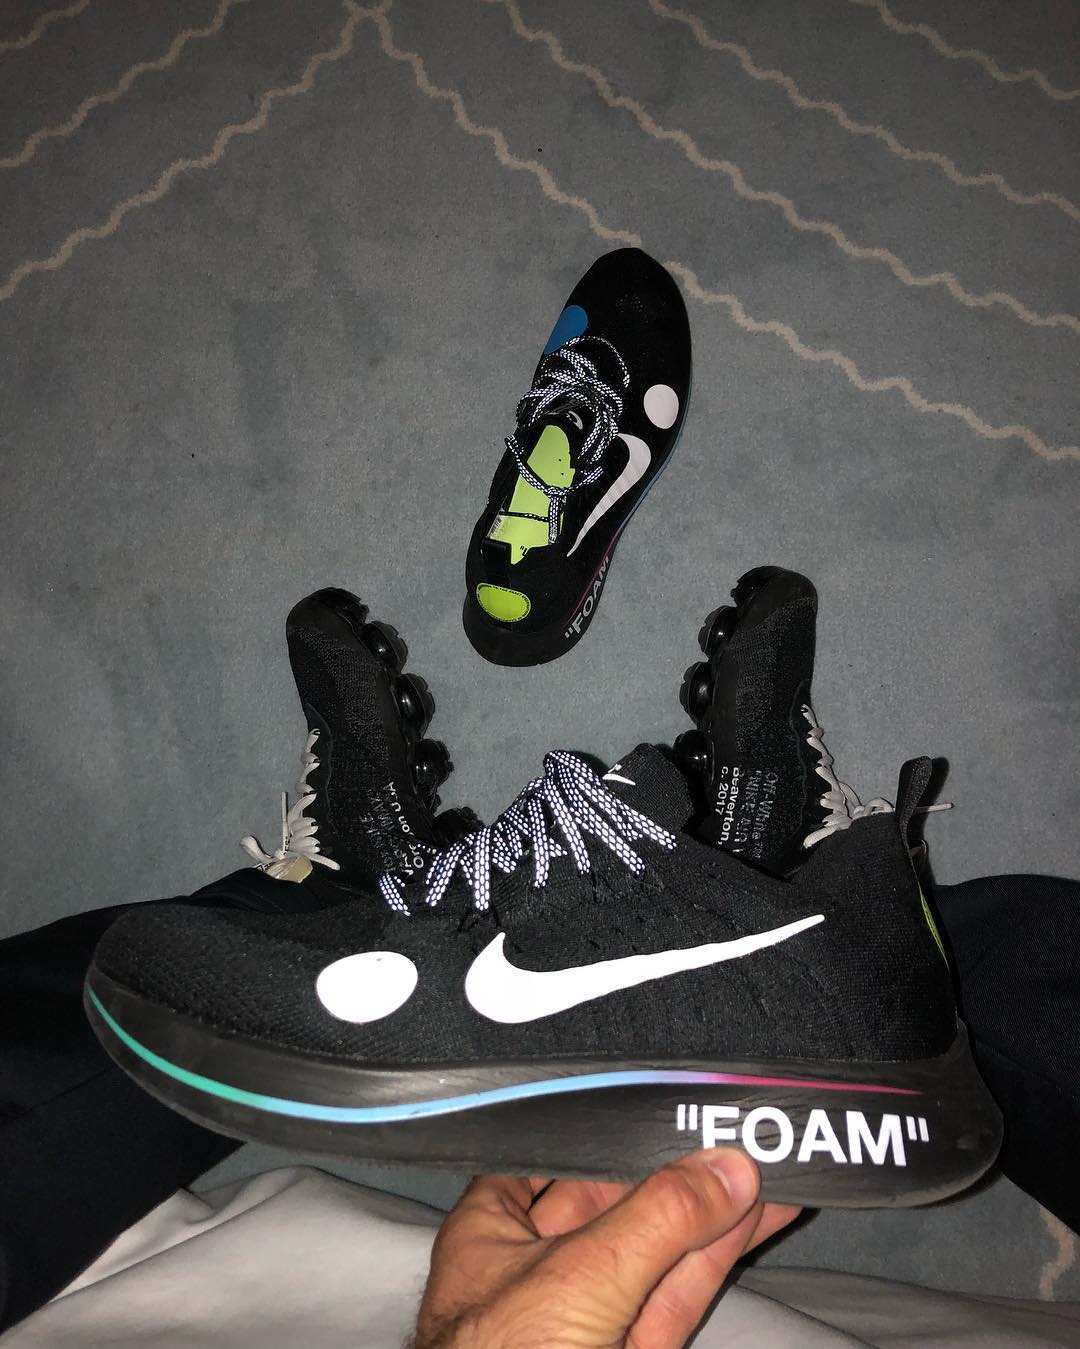 First look at the Off-White™ X Nike AF1 Low “Ghost Grey